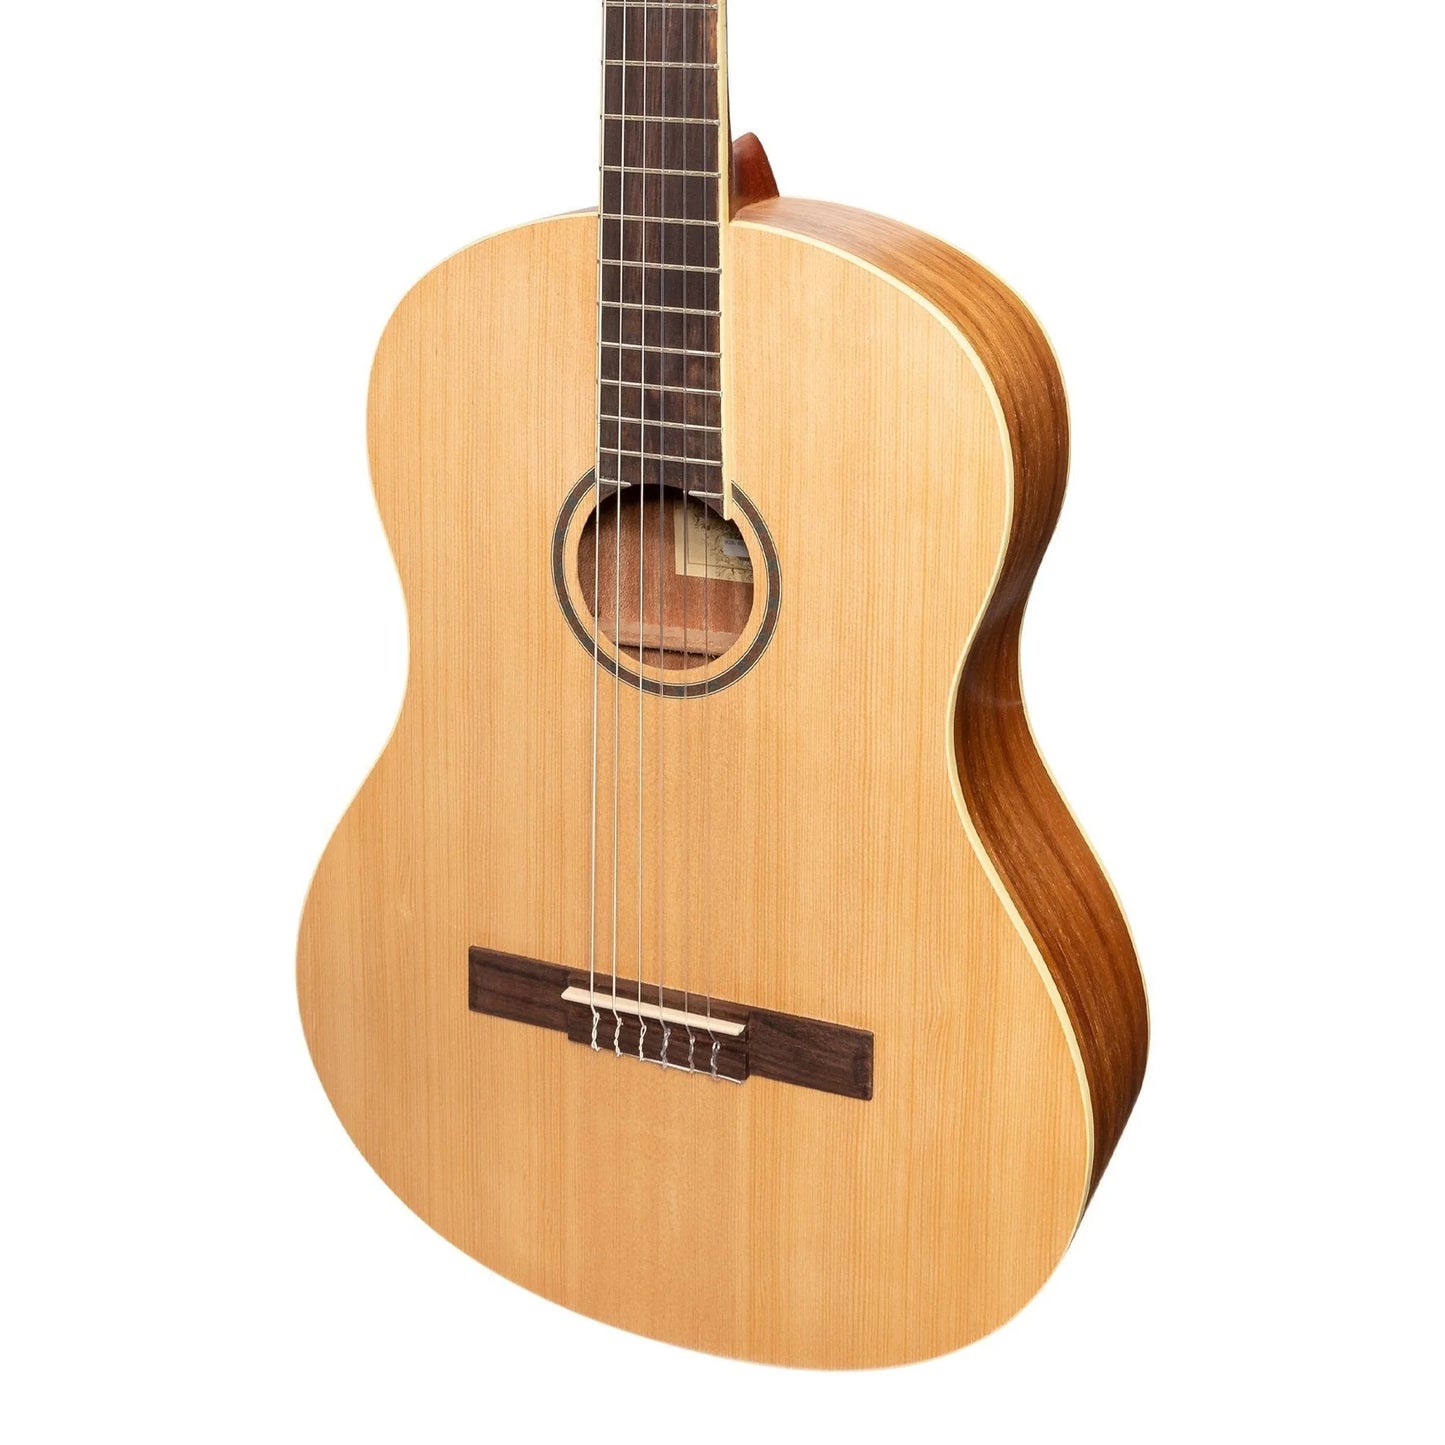 Martinez 'Slim Jim' Full Size Student Classical Guitar with Built In Tuner (Spruce/Rosewood)